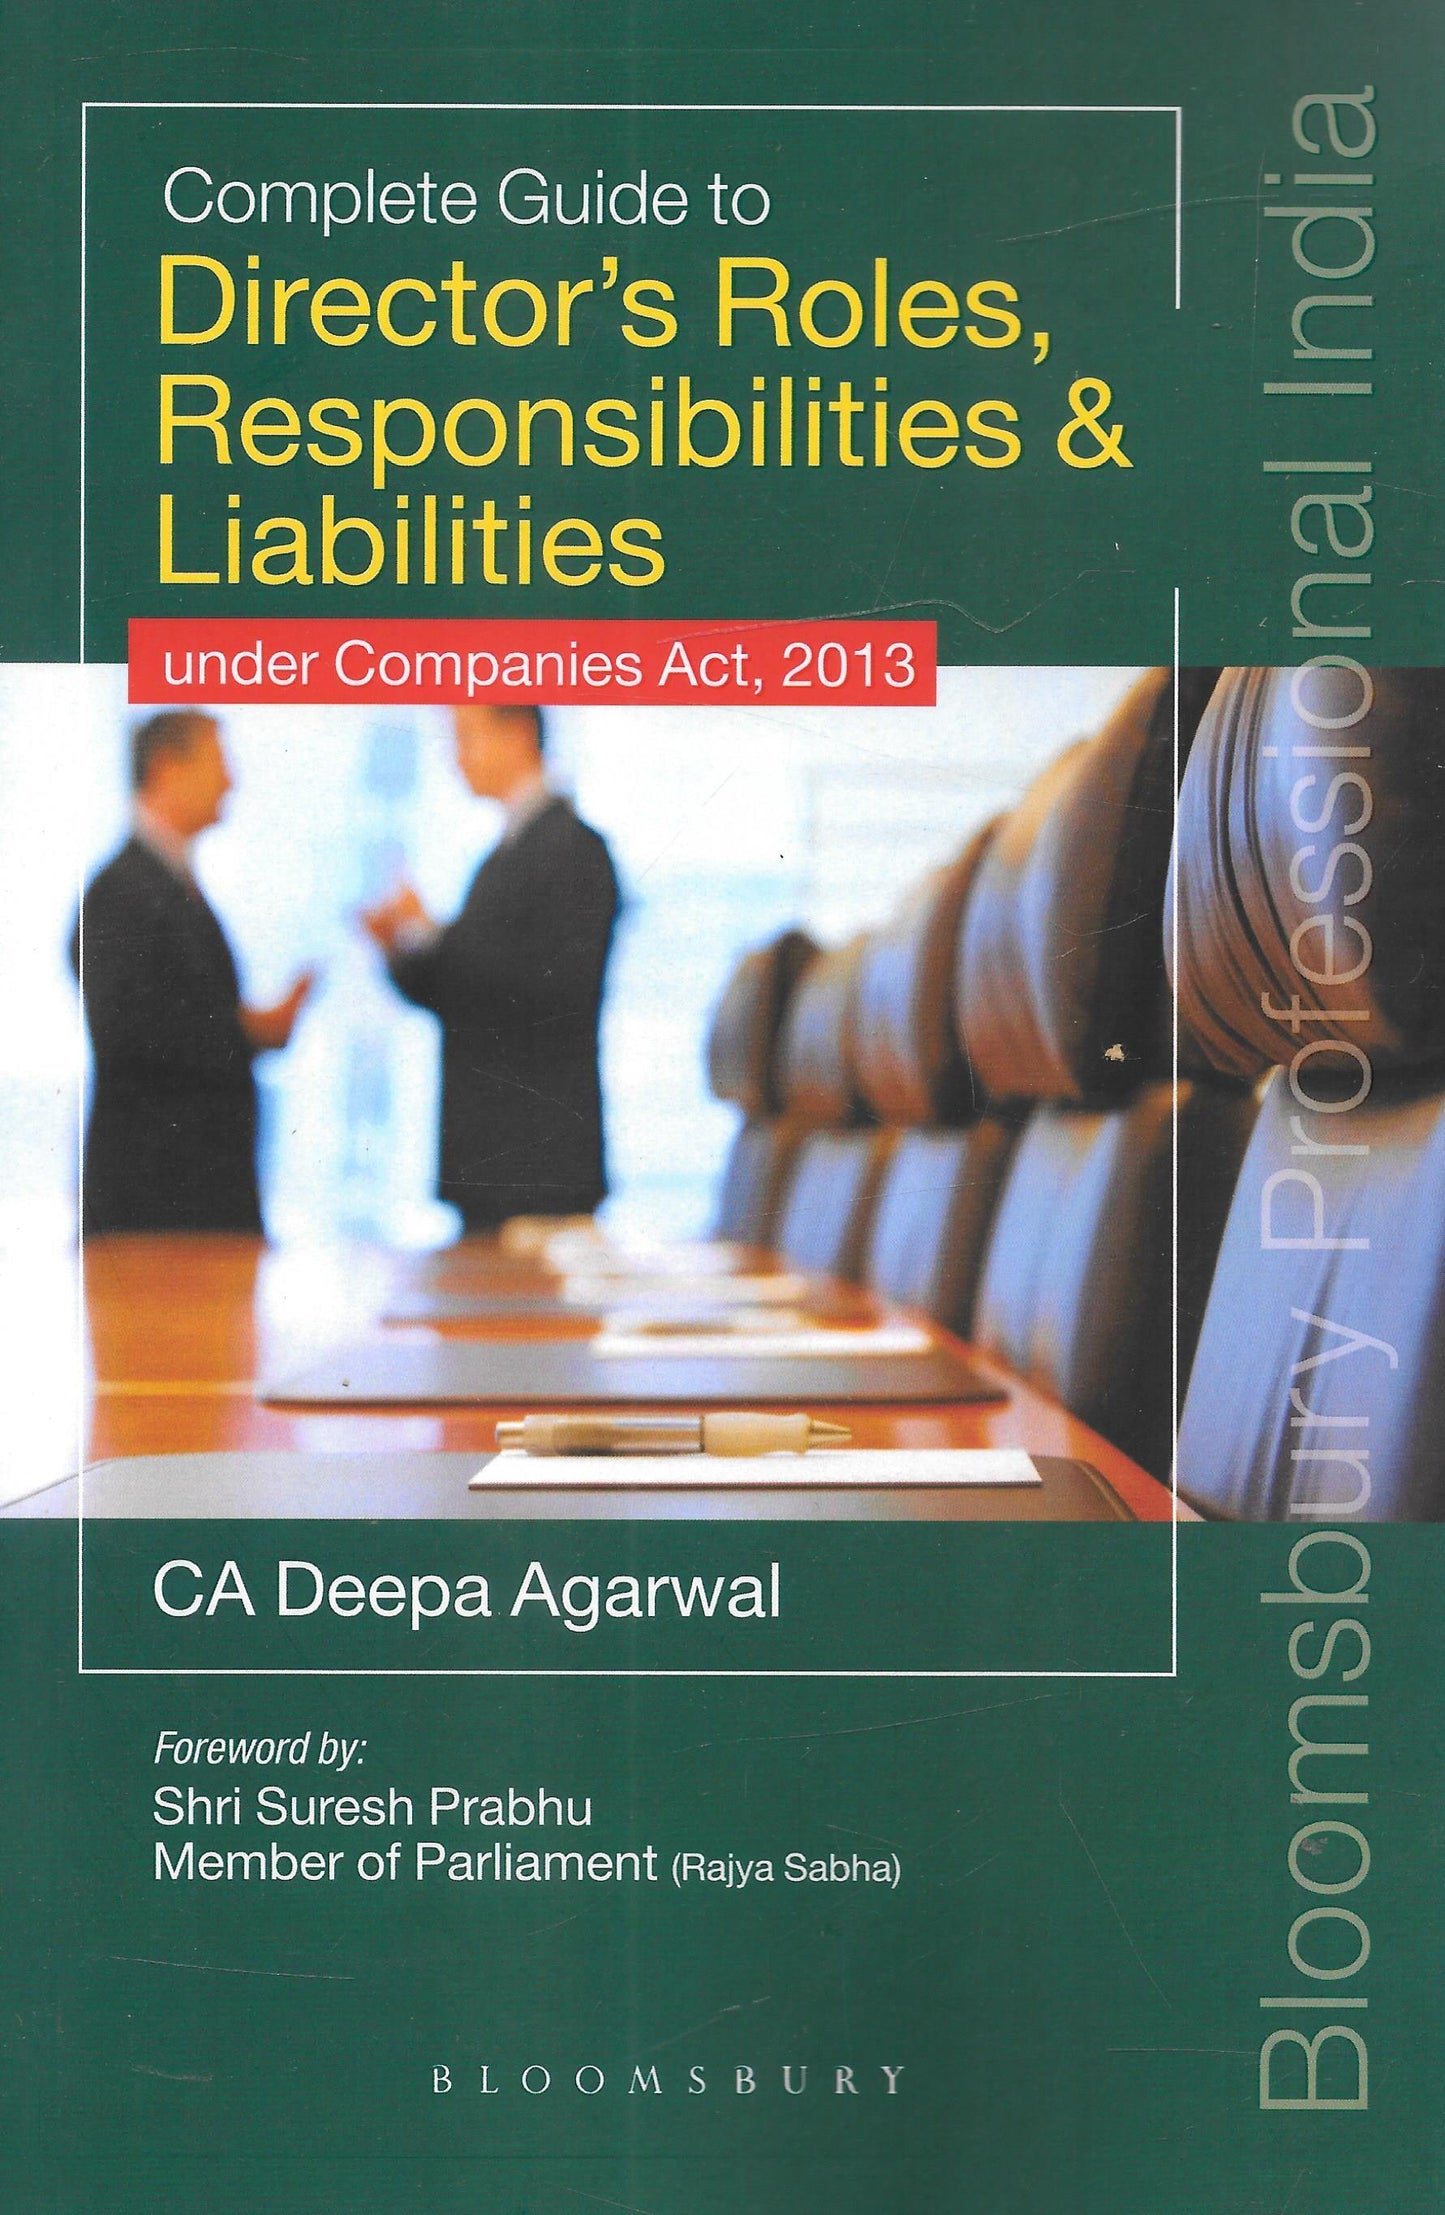 Complete Guide to Director’s Roles, Responsibilities & Liabilities - M&J Services